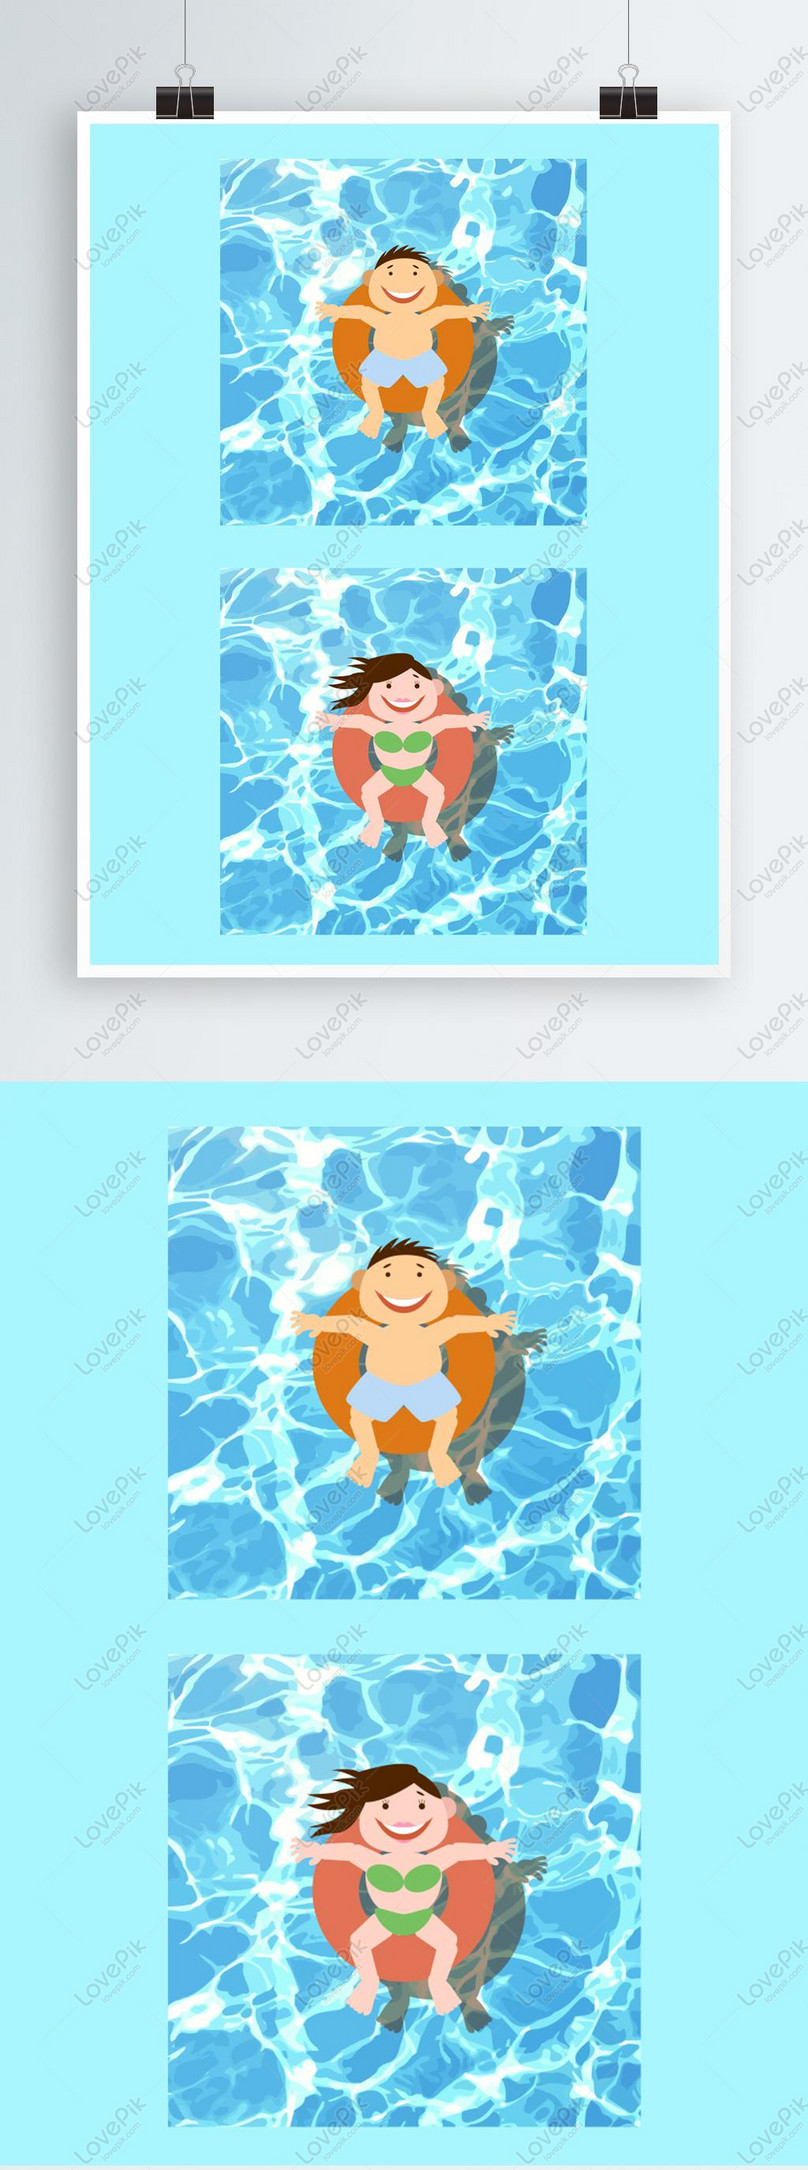 Flat Simple Illustration Wind Cartoon Summer Swimming Character PNG  Transparent AI images free download_2805 × 1024 px - Lovepik